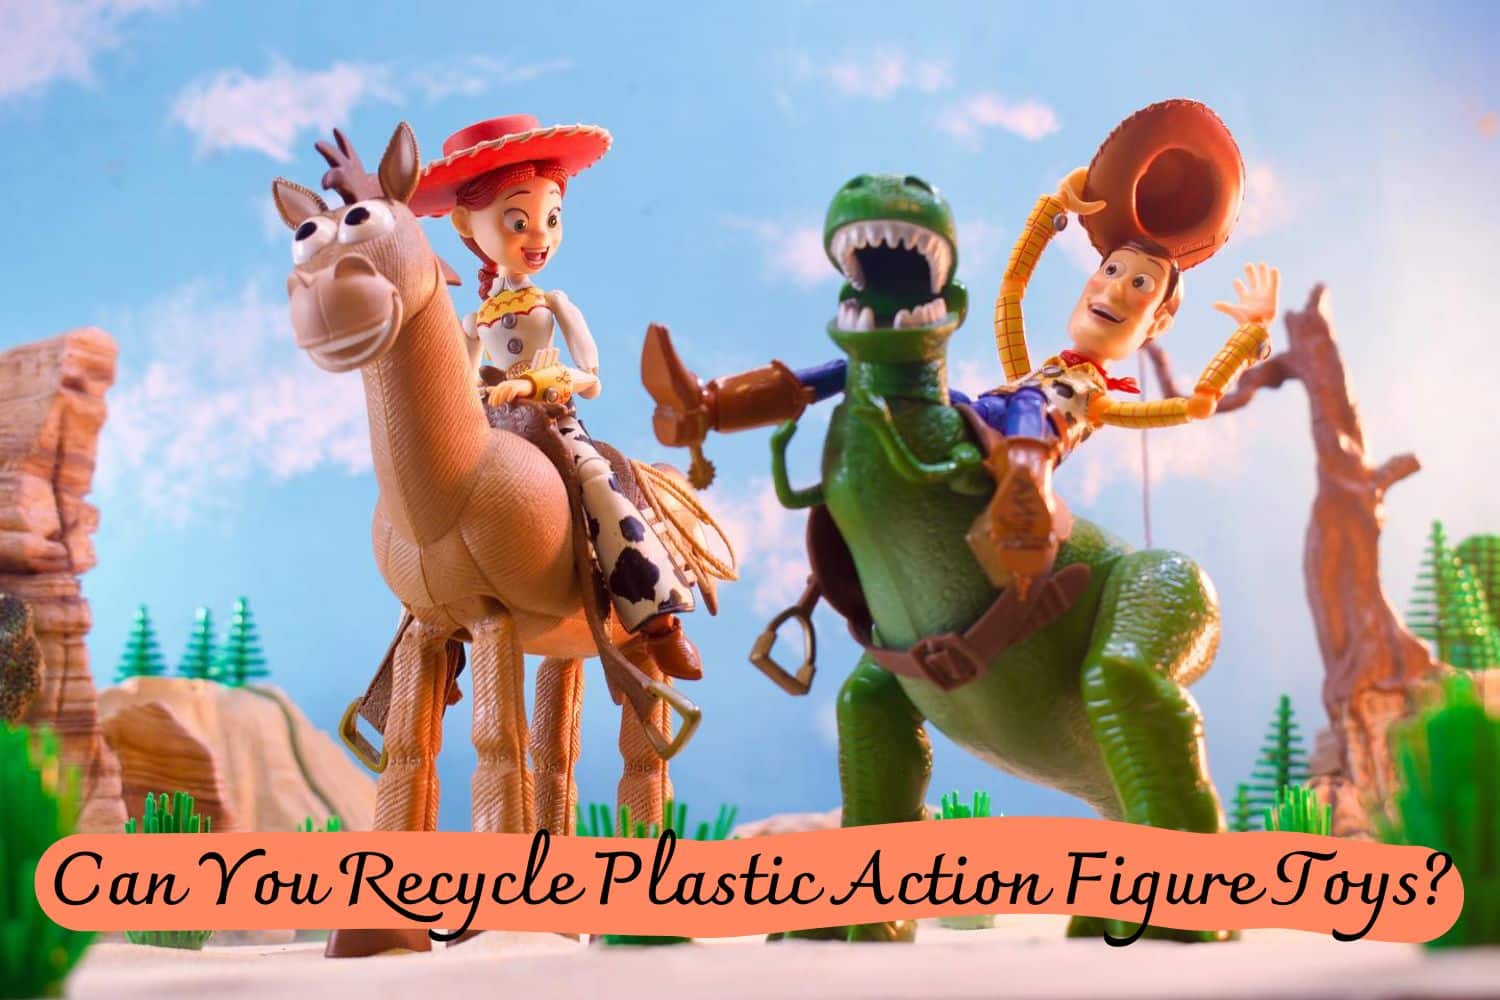 Can You Recycle Plastic Action Figure Toys?